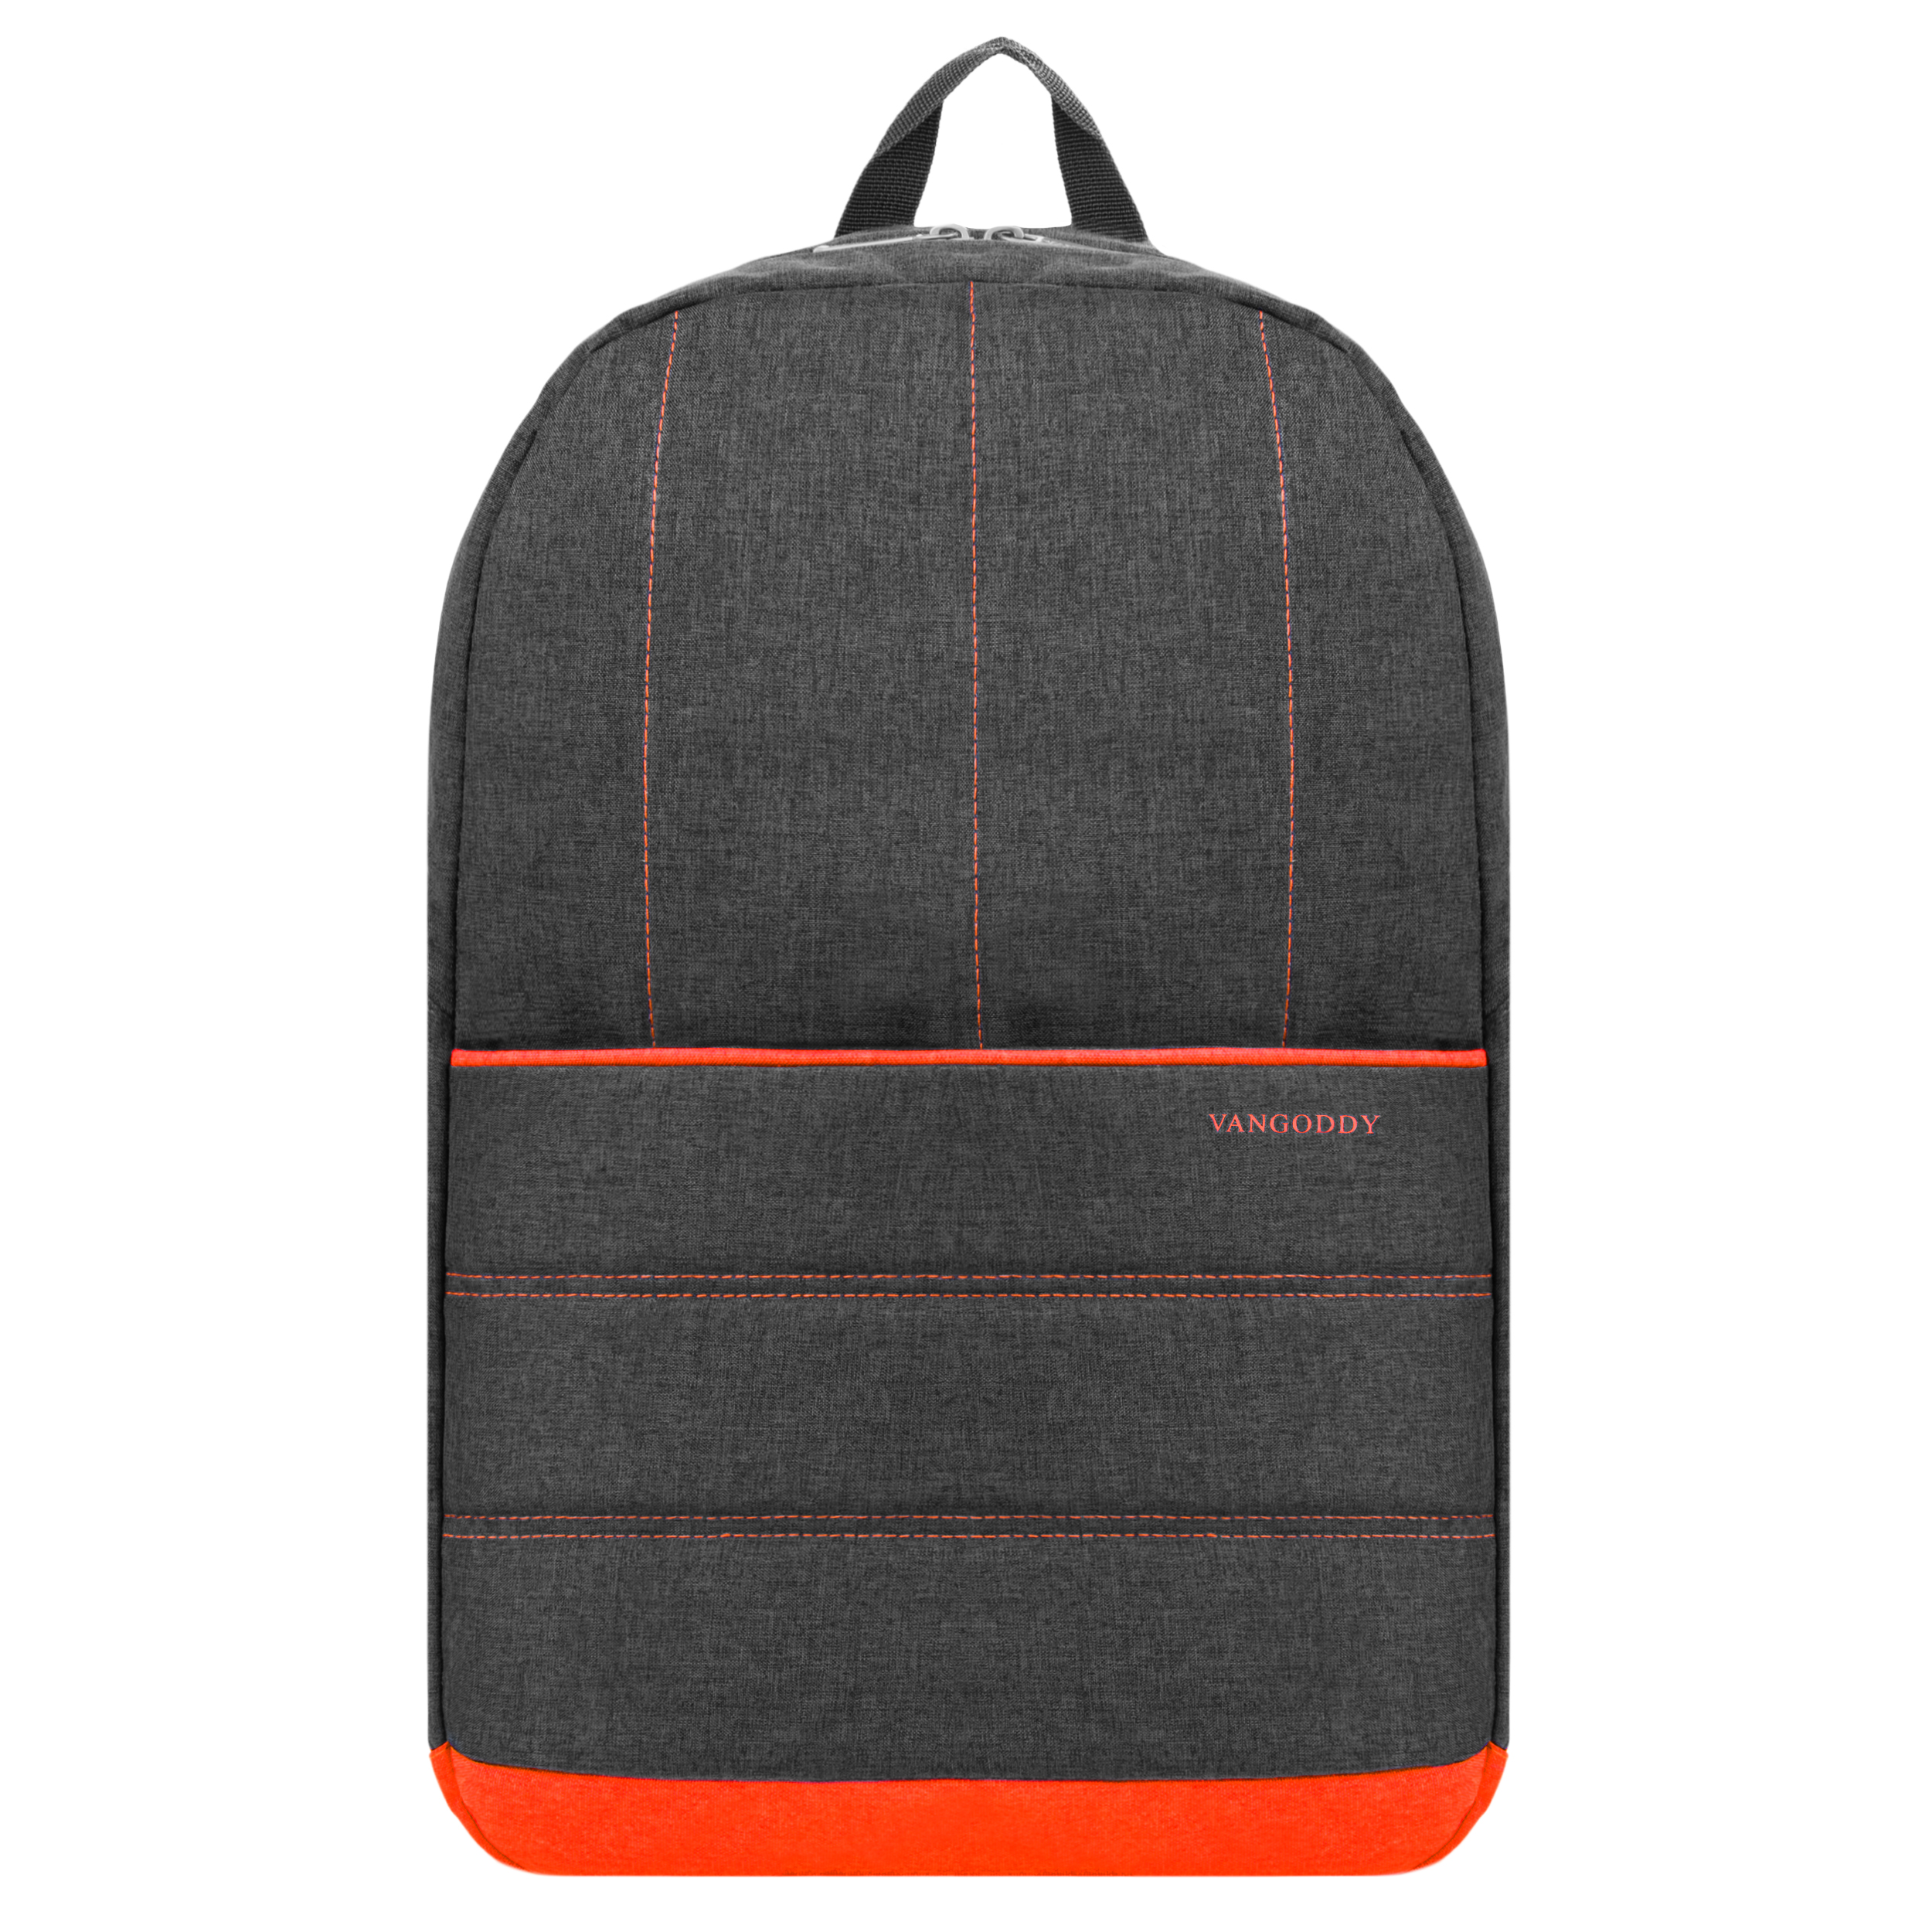 Grove Laptop Backpack 15.6